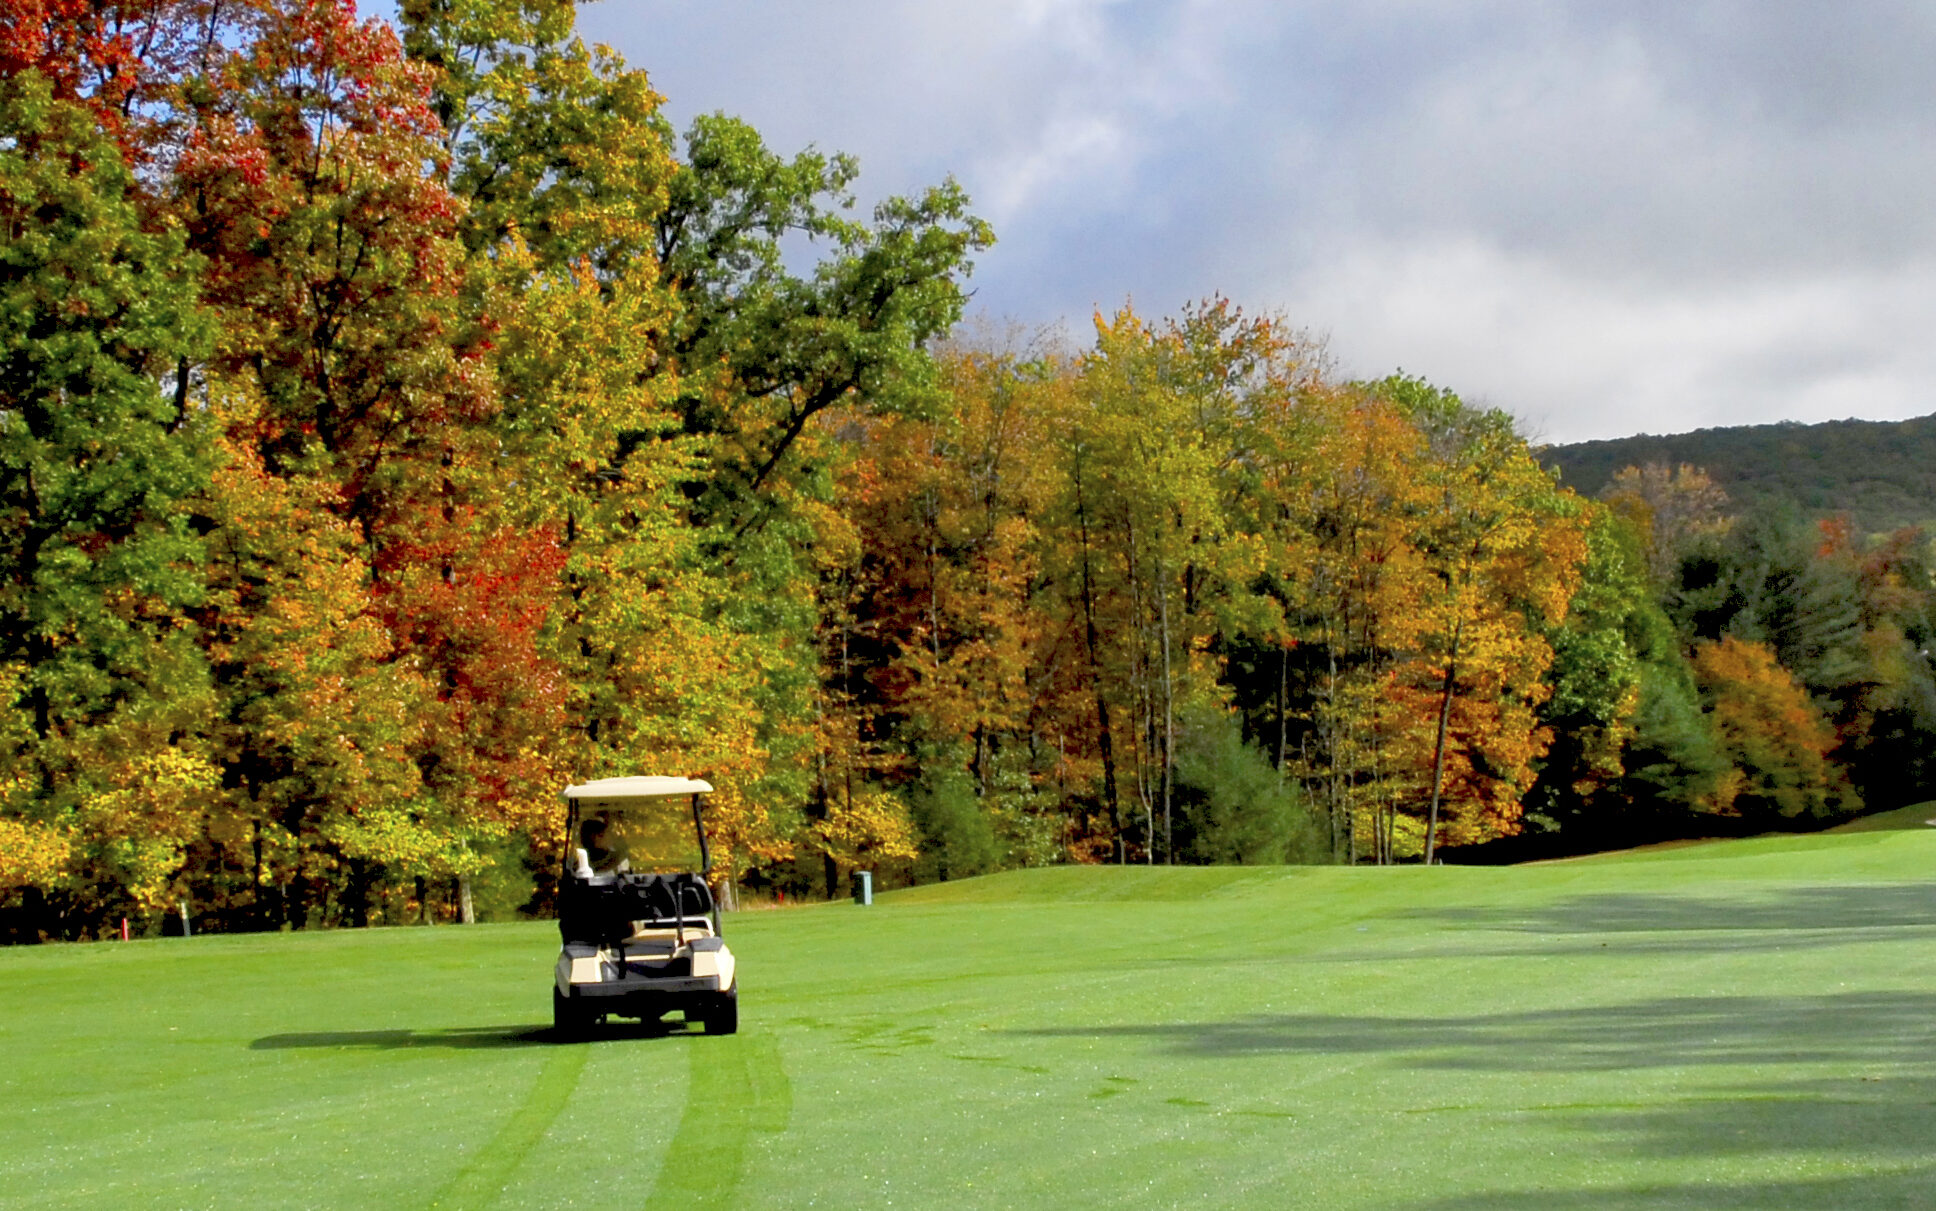 Golf cart on the course in autumn.